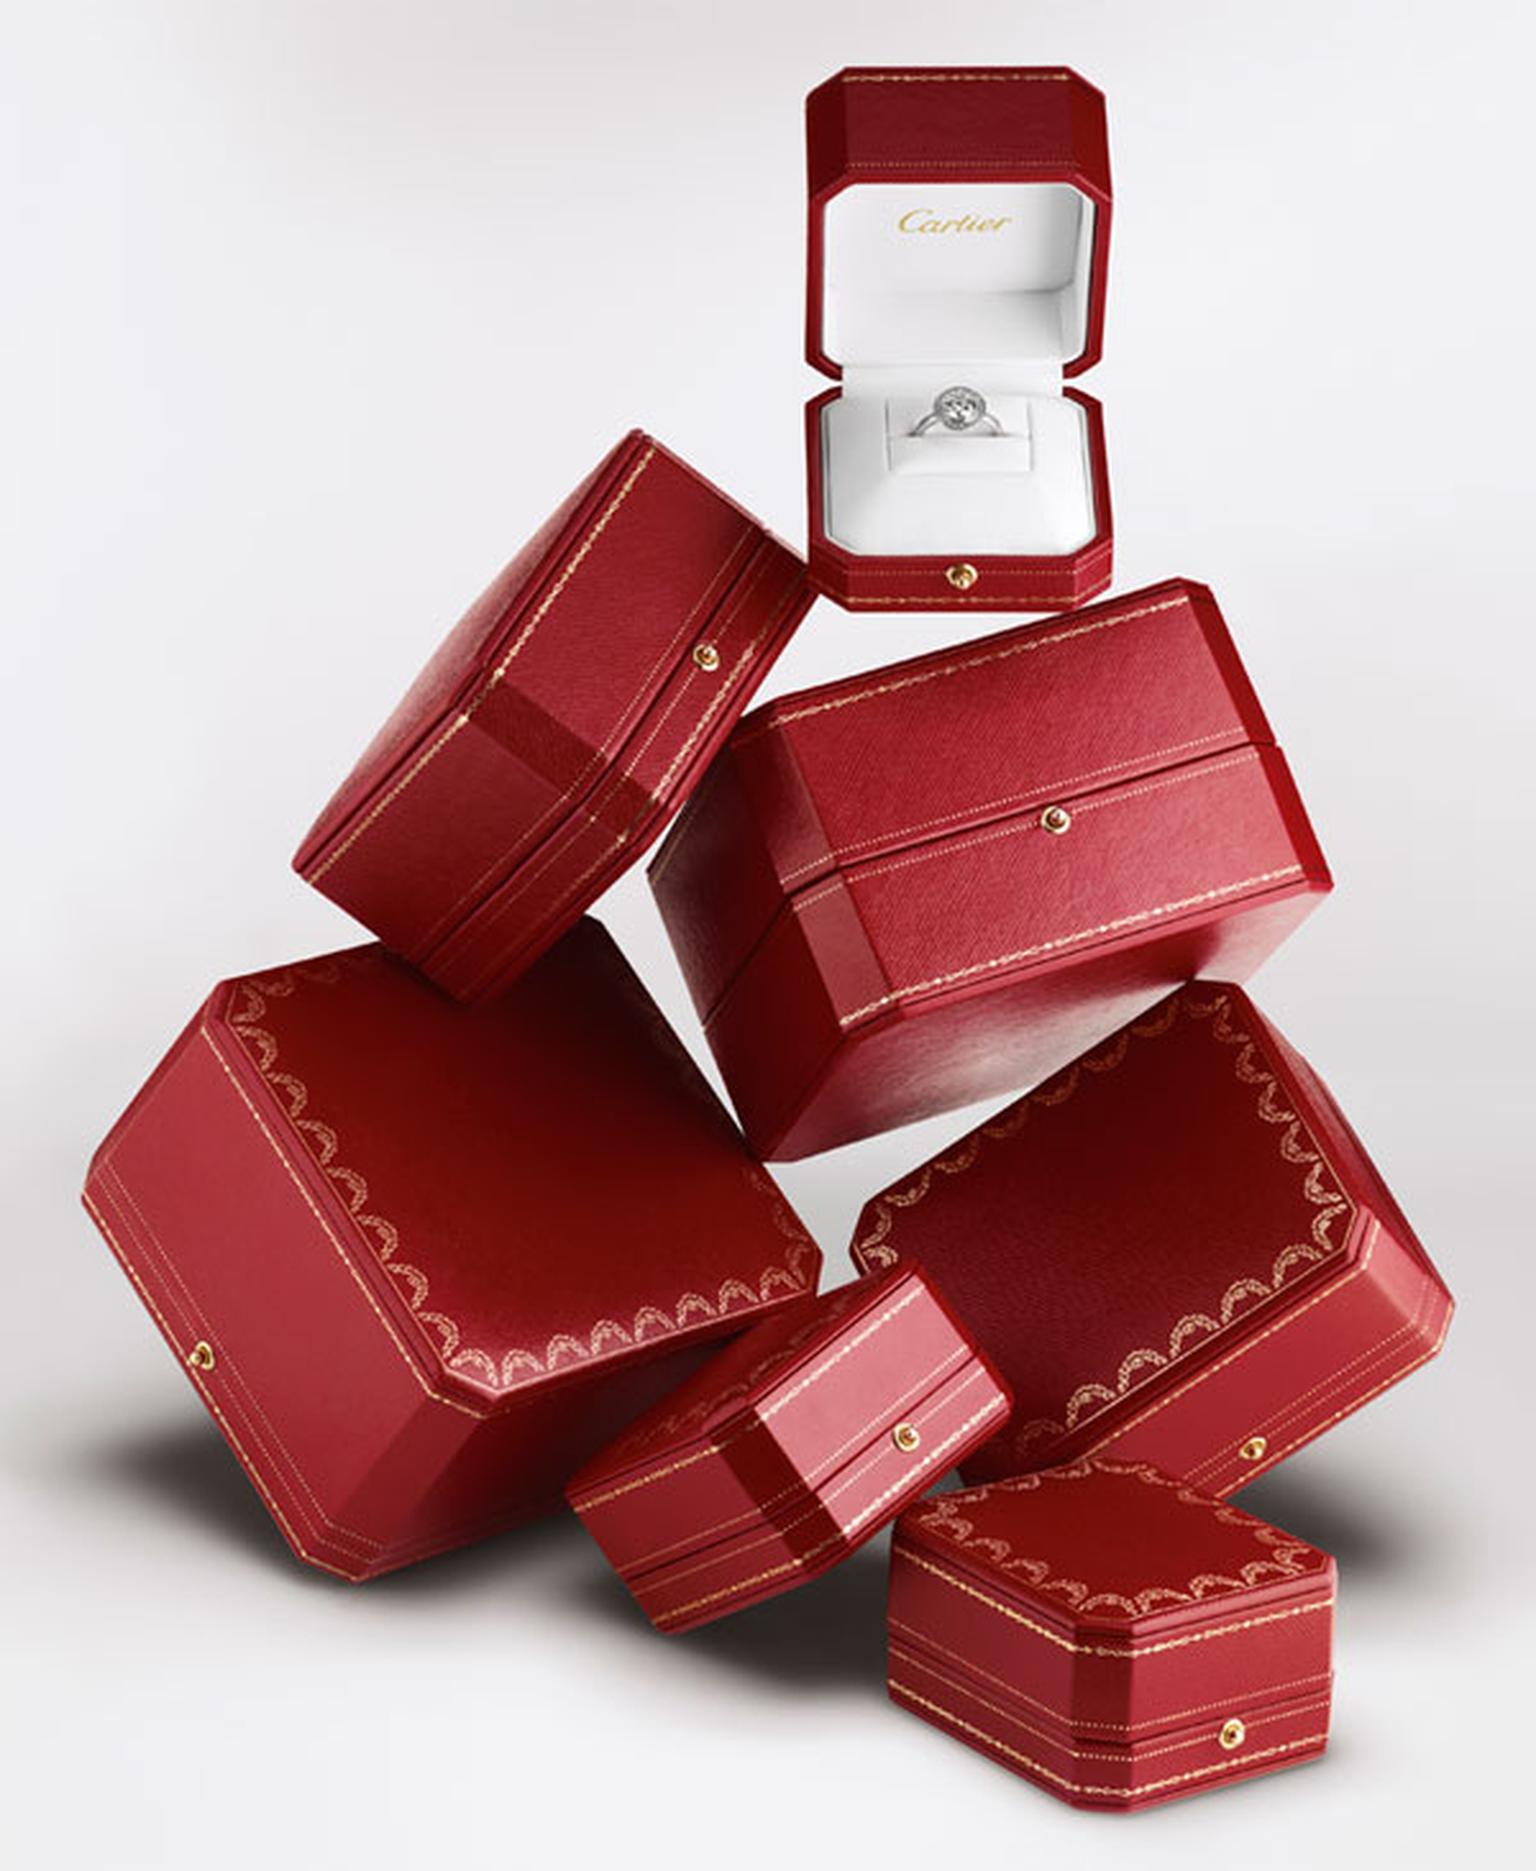 Cartier-boxes-and-Cartier-d'Amour-solitaire